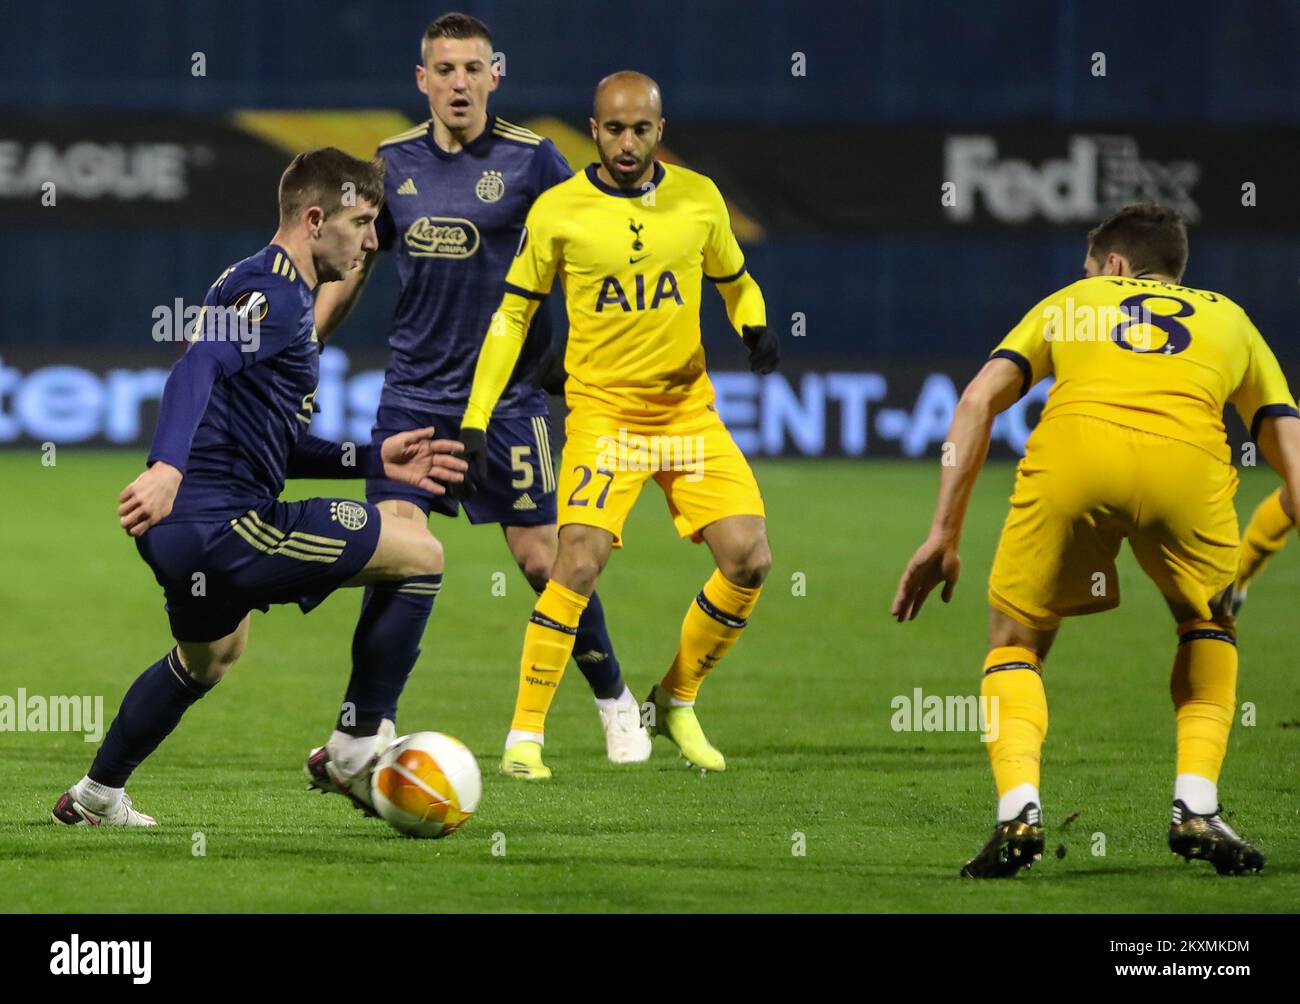 ZAGREB, CROATIA - MARCH 18: Luka Ivanusec of Dinamo Zagreb and Lucas Moura of Tottenham Hotspur during the UEFA Europa League Round of 16 Second Leg match between Dinamo Zagreb and Tottenham Hotspur at Stadium Maksimir on March 18, 2021 in Zagreb, Croatia. Sporting stadiums around Europe remain under strict restrictions due to the Coronavirus Pandemic as Government social distancing laws prohibit fans inside venues resulting in games being played behind closed doors. (Photo by Goran Stanzl/Pixsell) Stock Photo